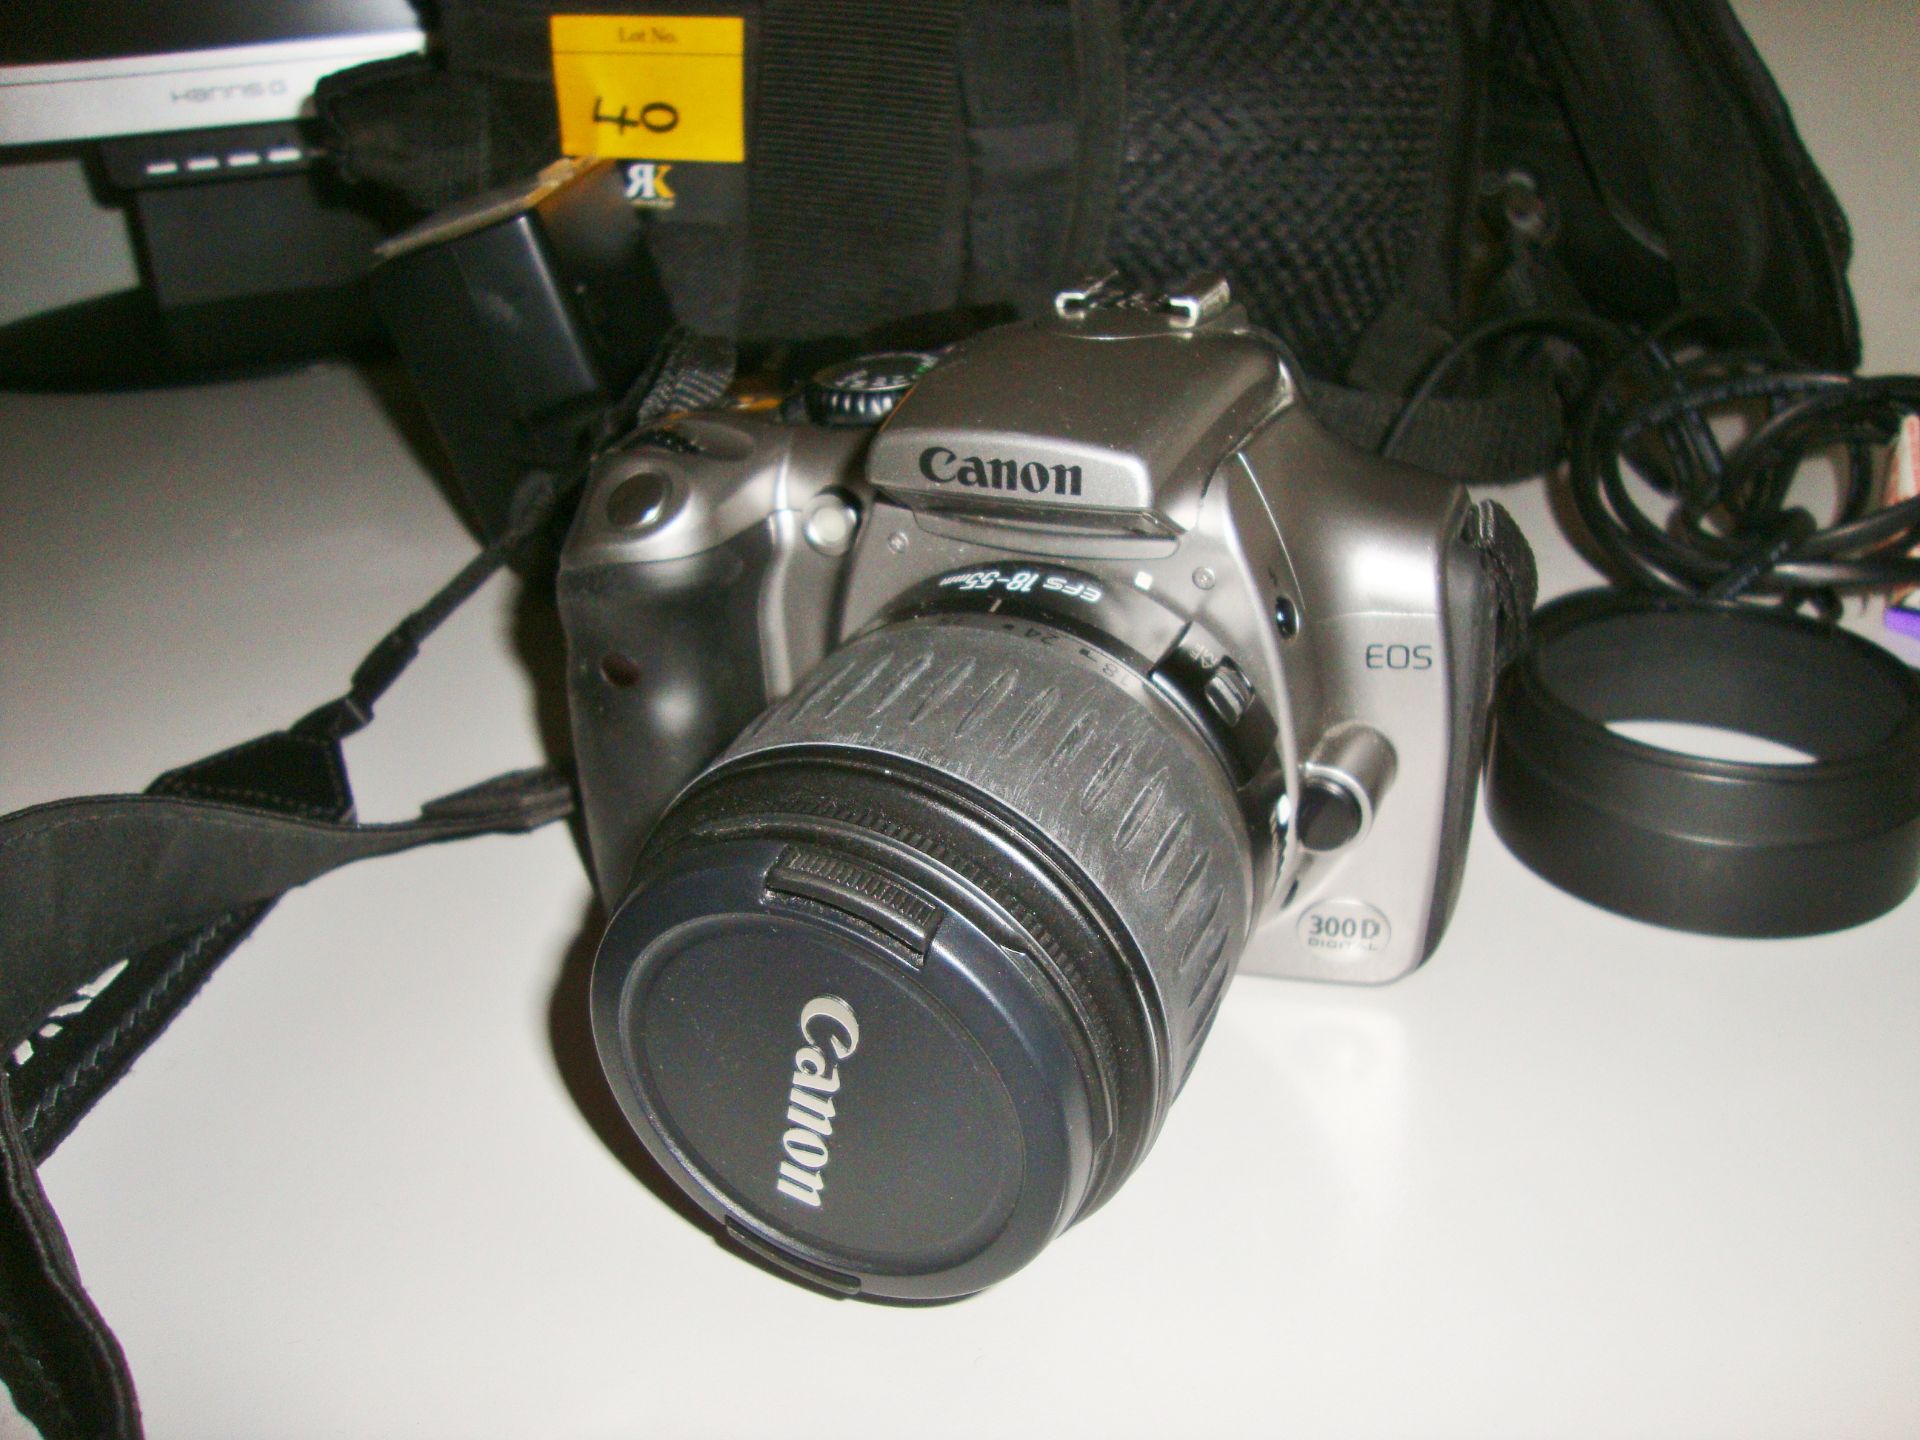 Canon 300D EOS digital SLR camera and lenses - Image 3 of 9